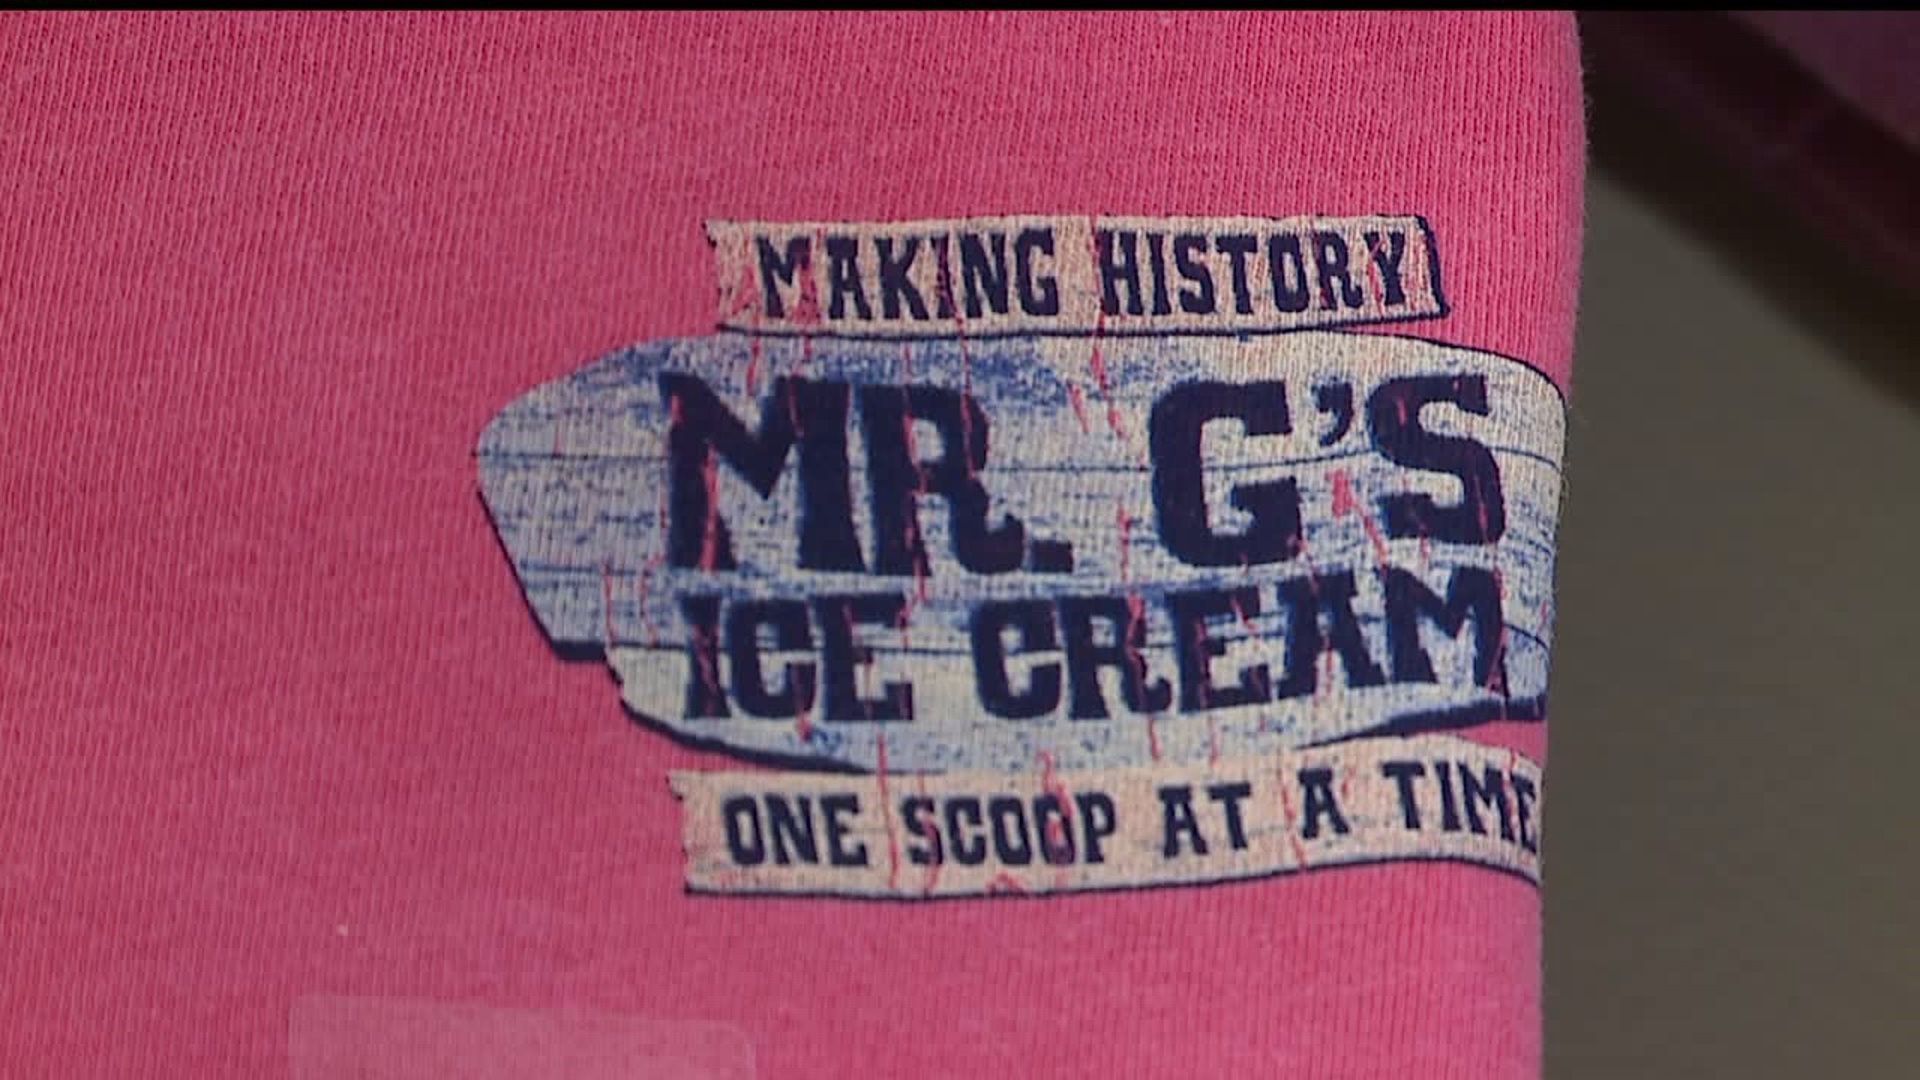 A scoop and a gift keep the history of Gettysburg at Mr. G`s